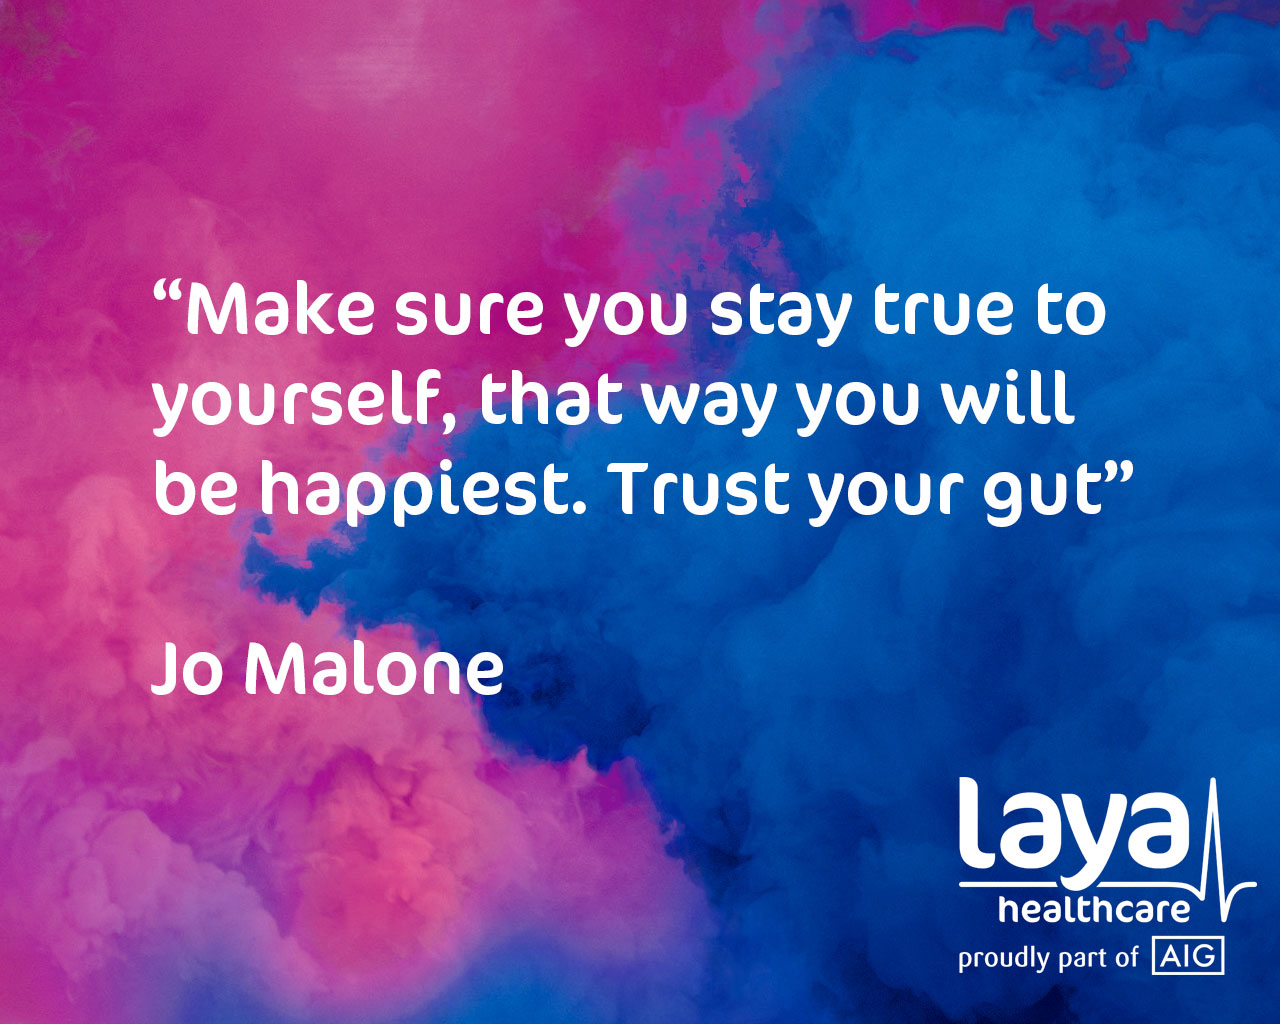 quote from jo malone saying to trust your gut